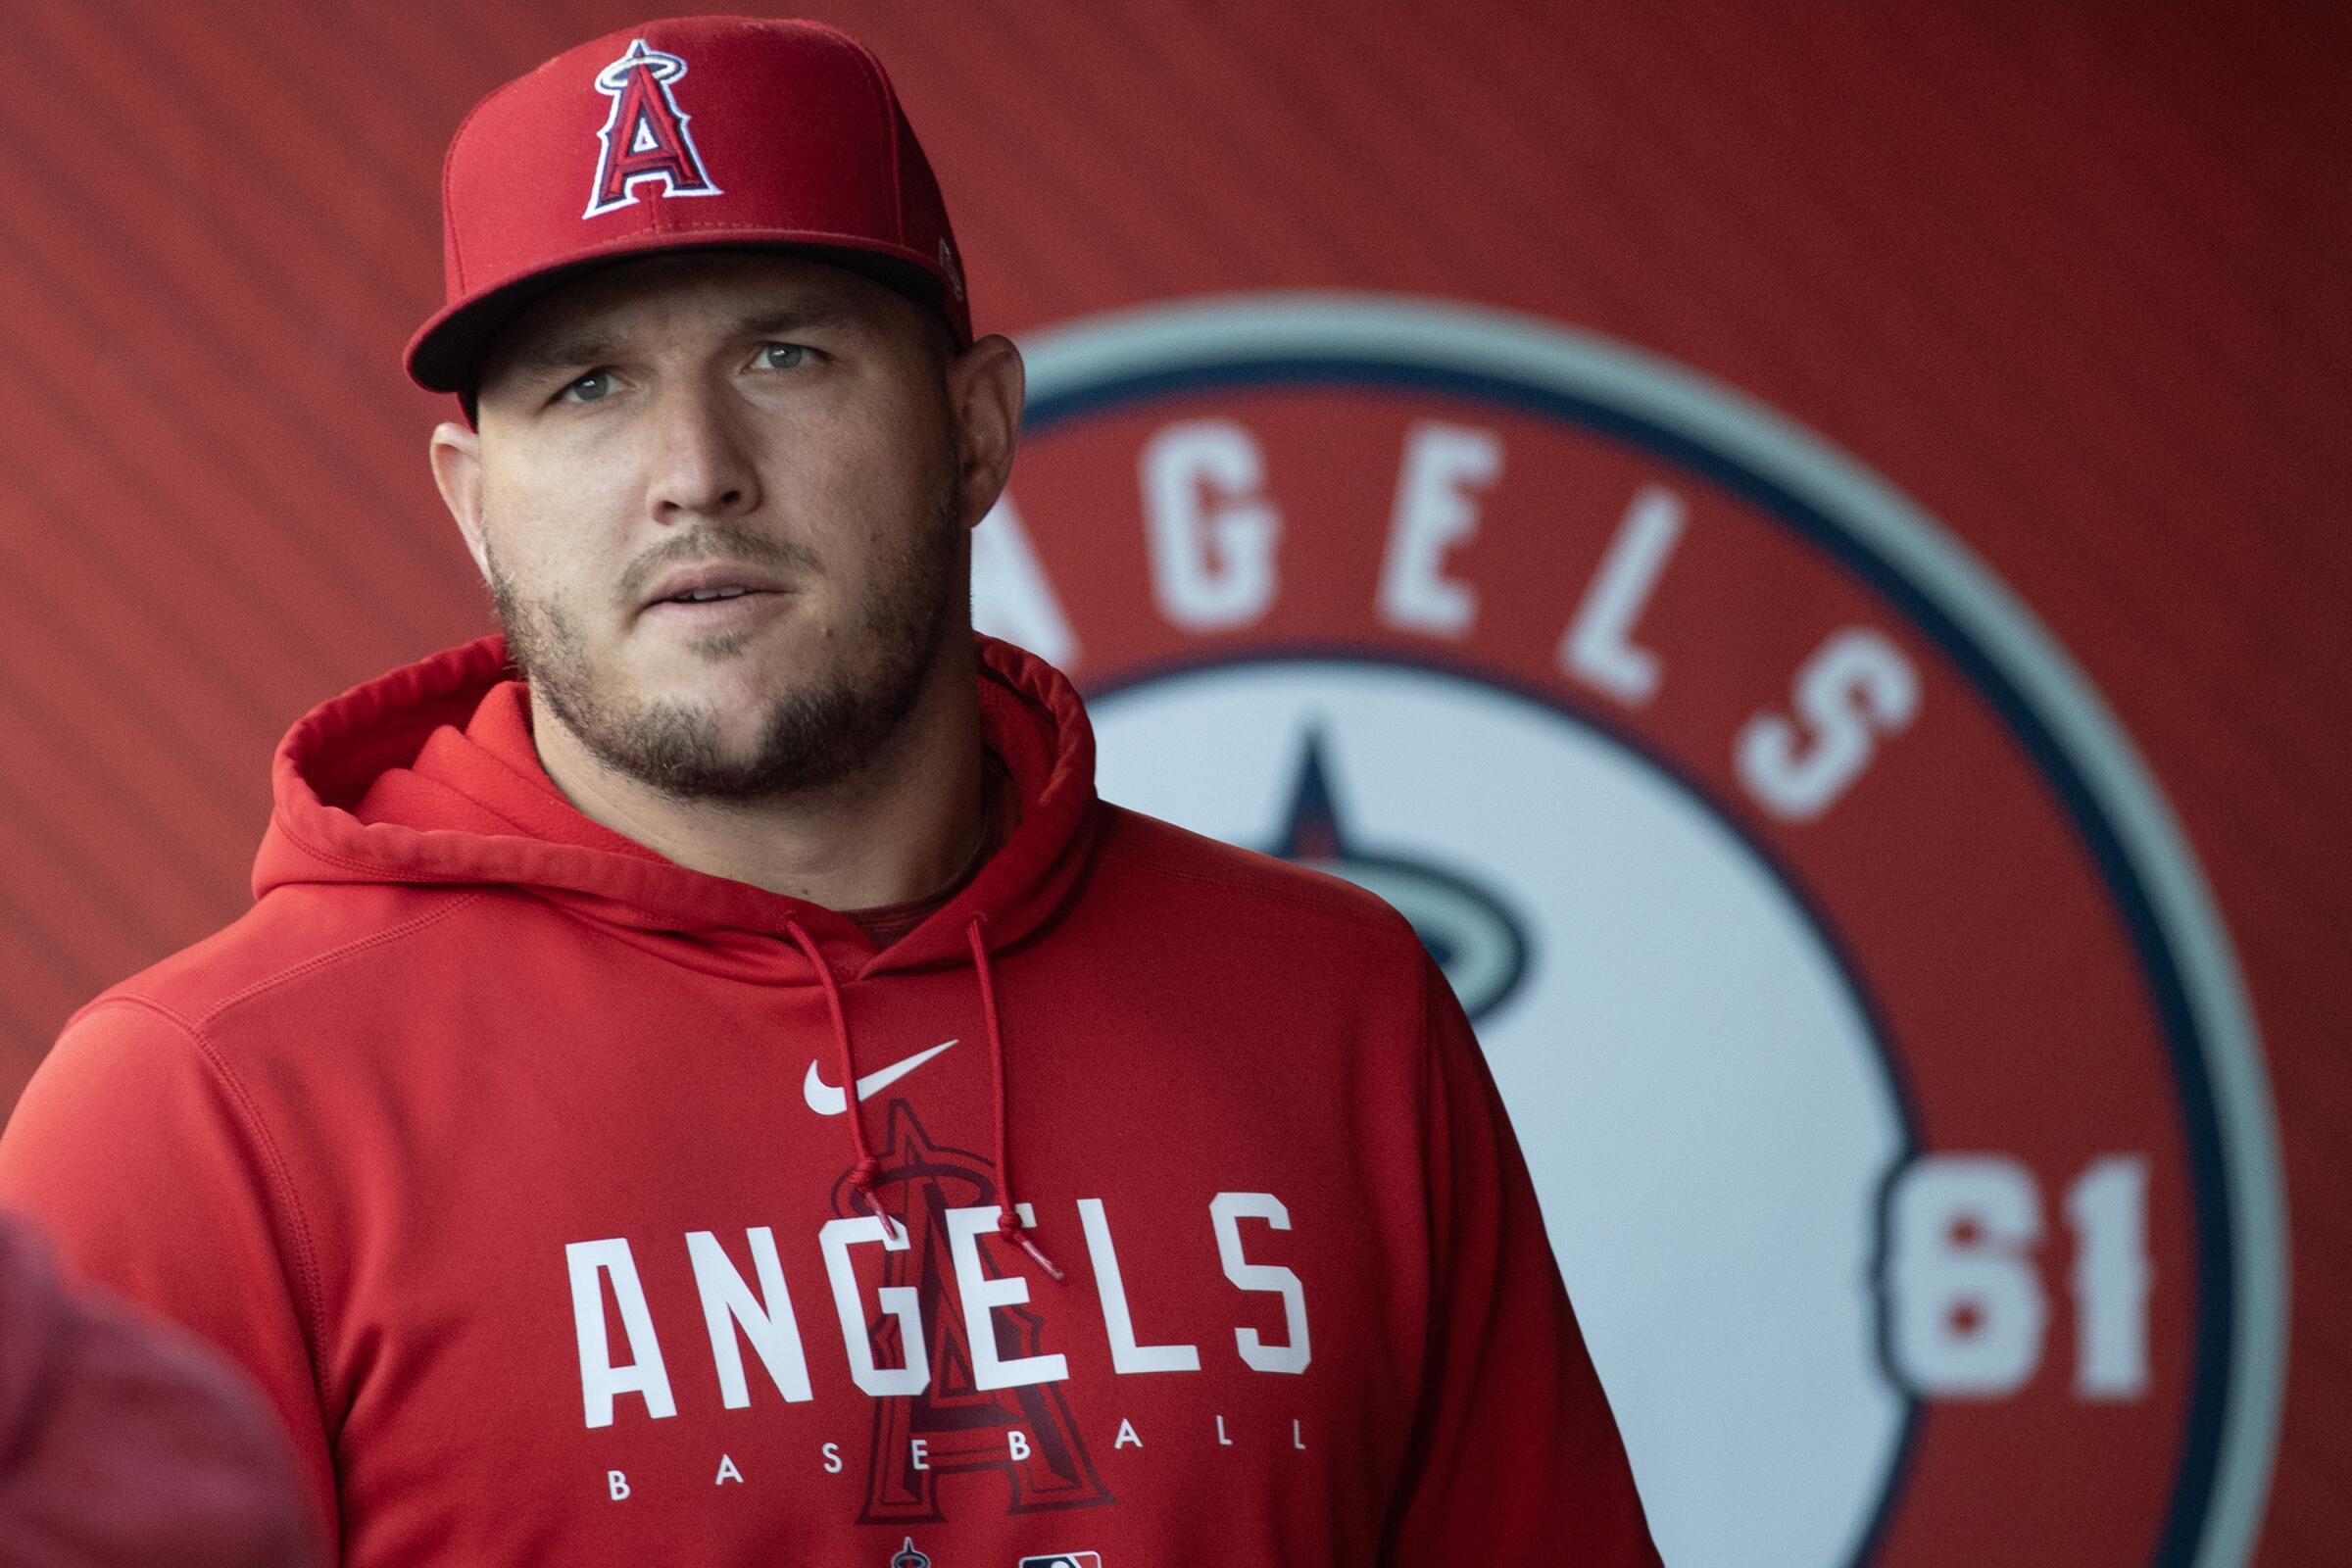 Angels star Mike Trout walks in the dugout before a game.